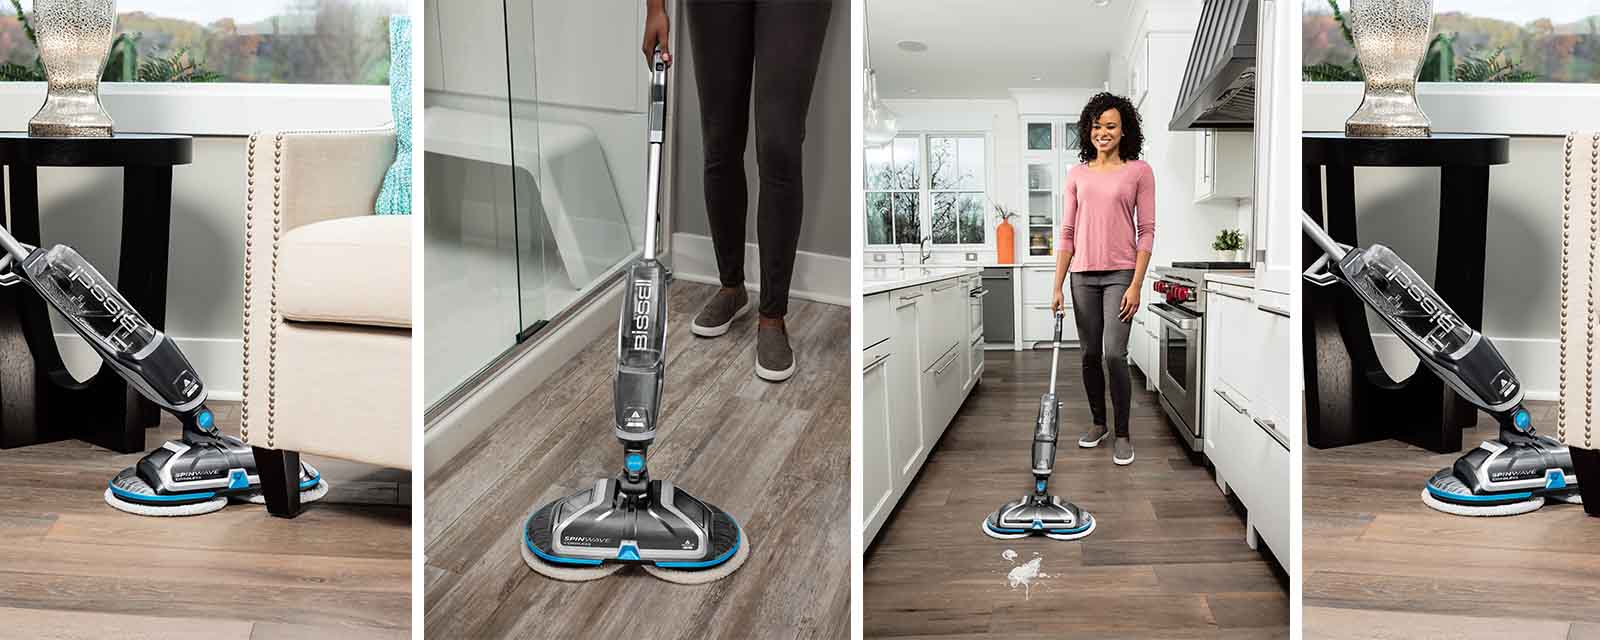 Why I Love the Bissell SpinWave Cordless Mop